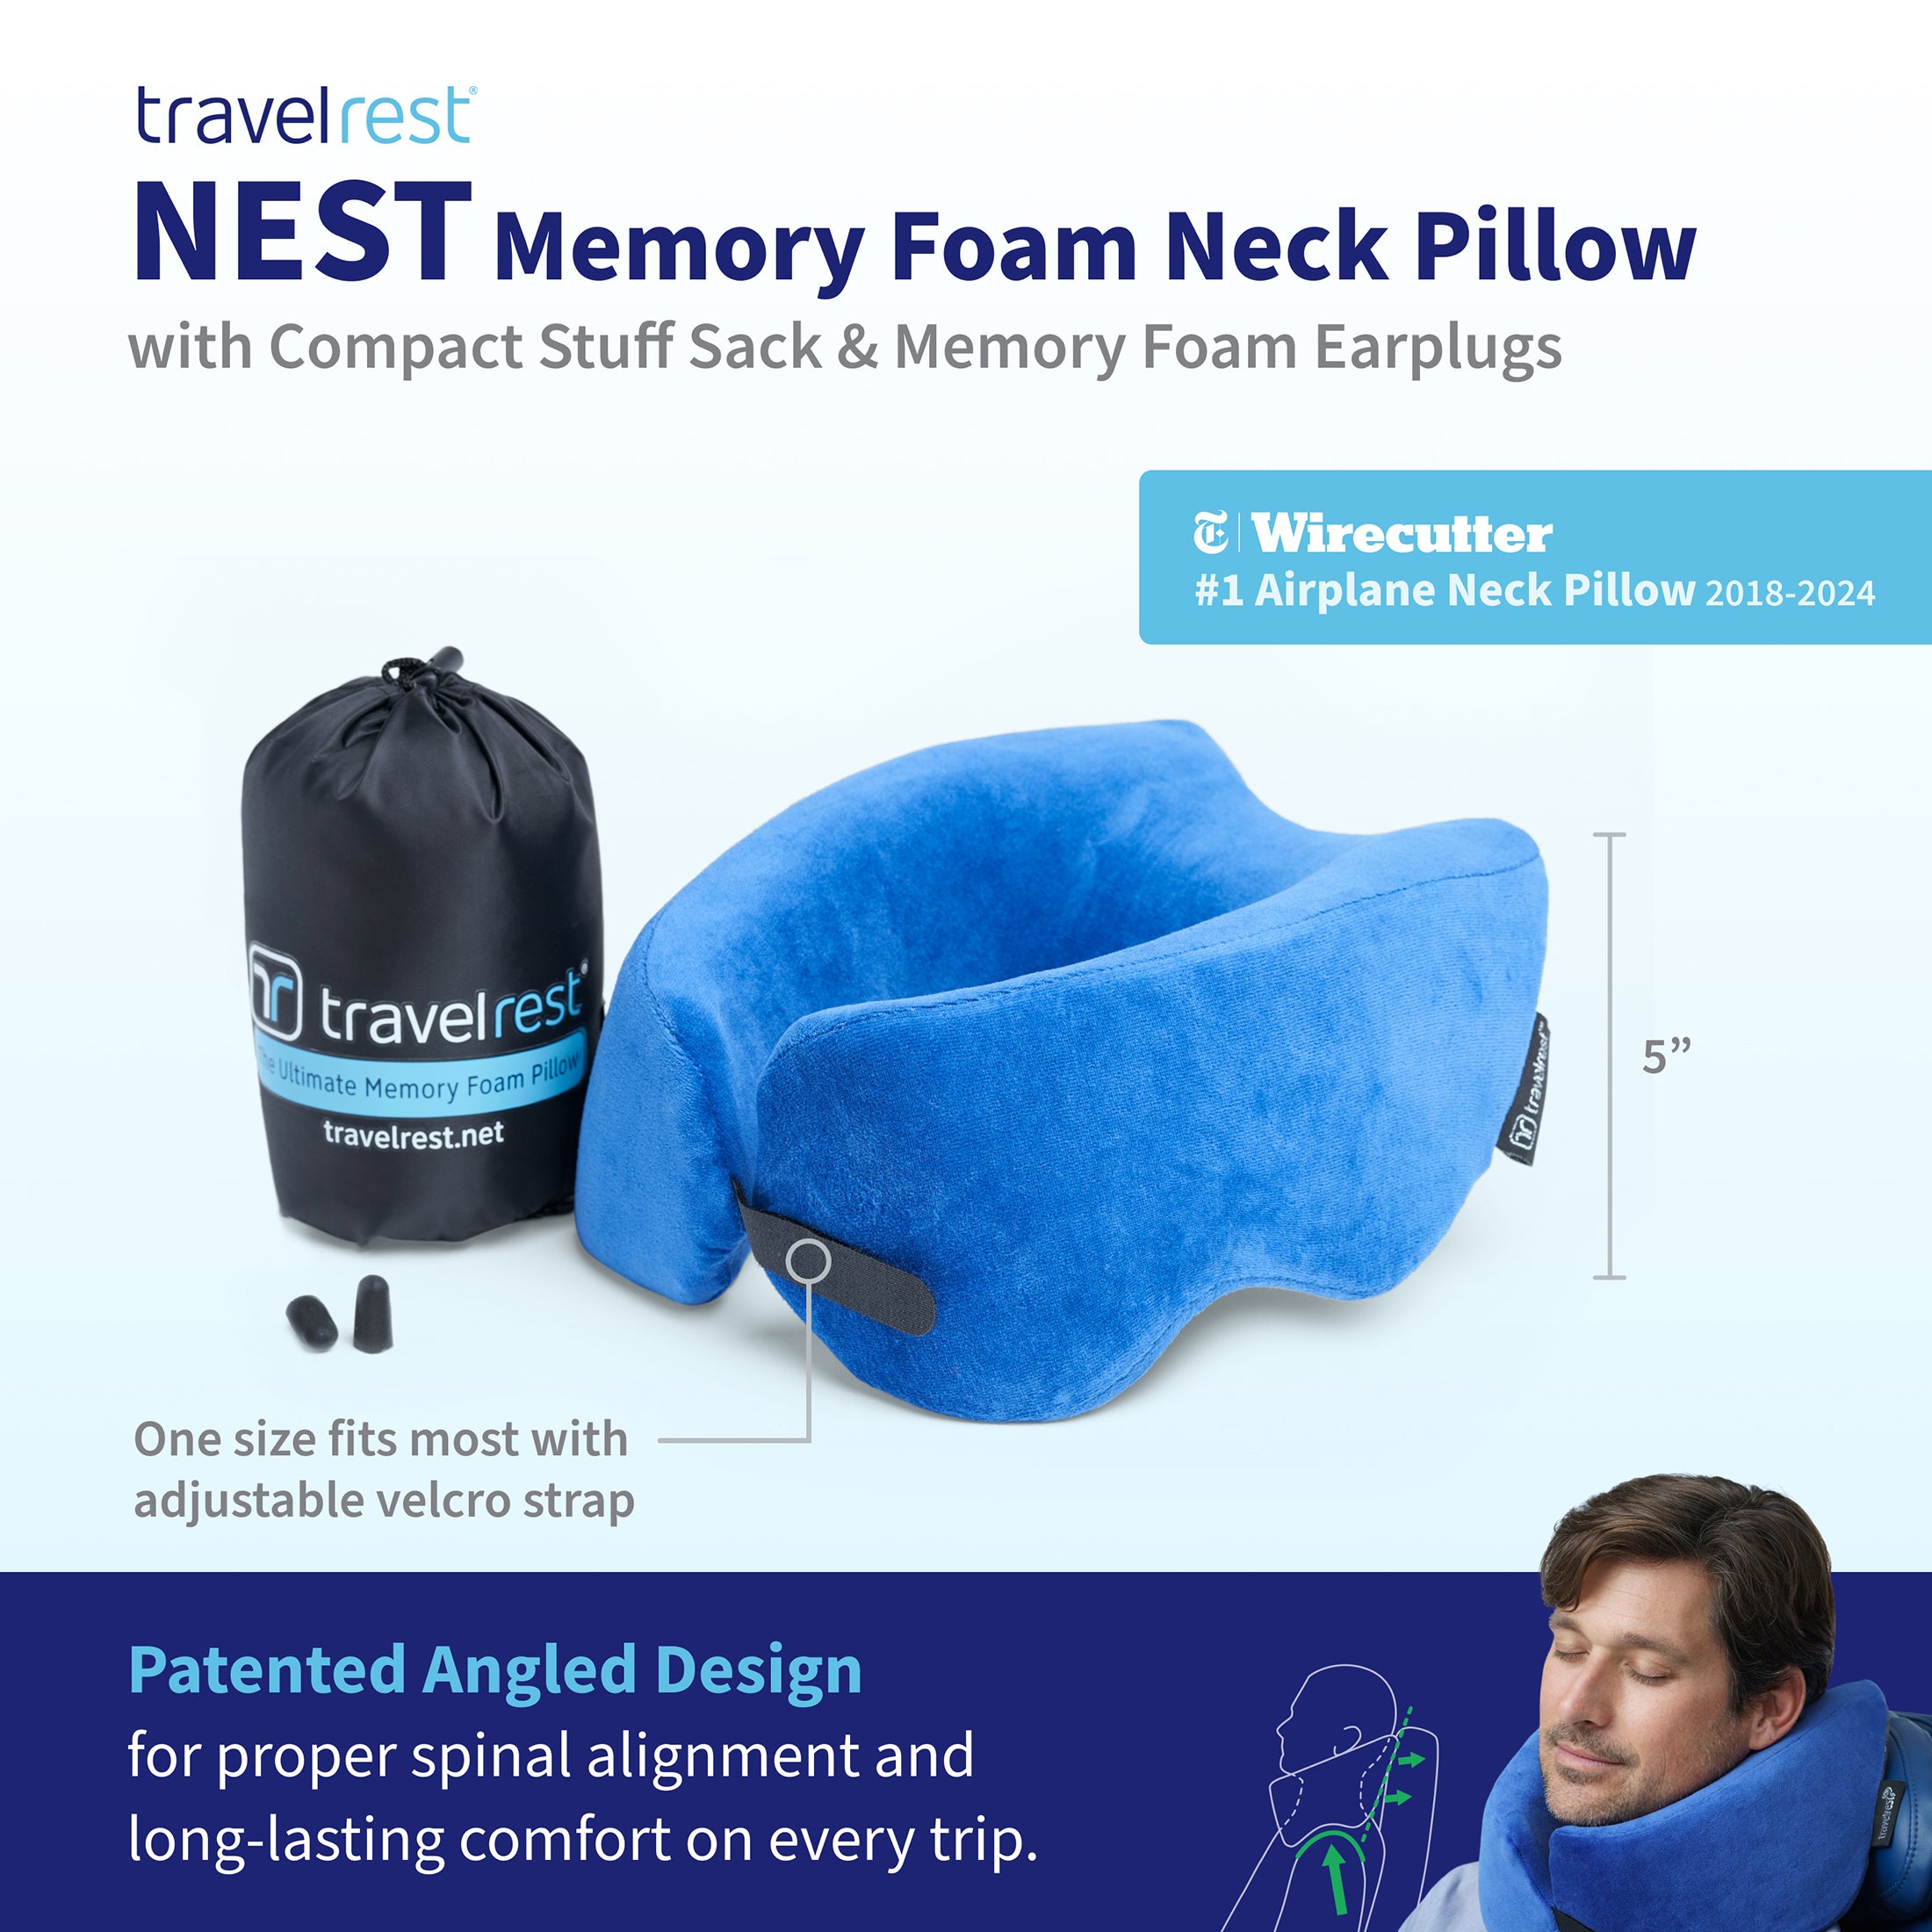 Travelrest Nest Patented Ultimate Memory Foam Travel Pillow/Neck Pillow Voted Best Travel Pillow for 2022 by Wirecutter - image 2 of 11